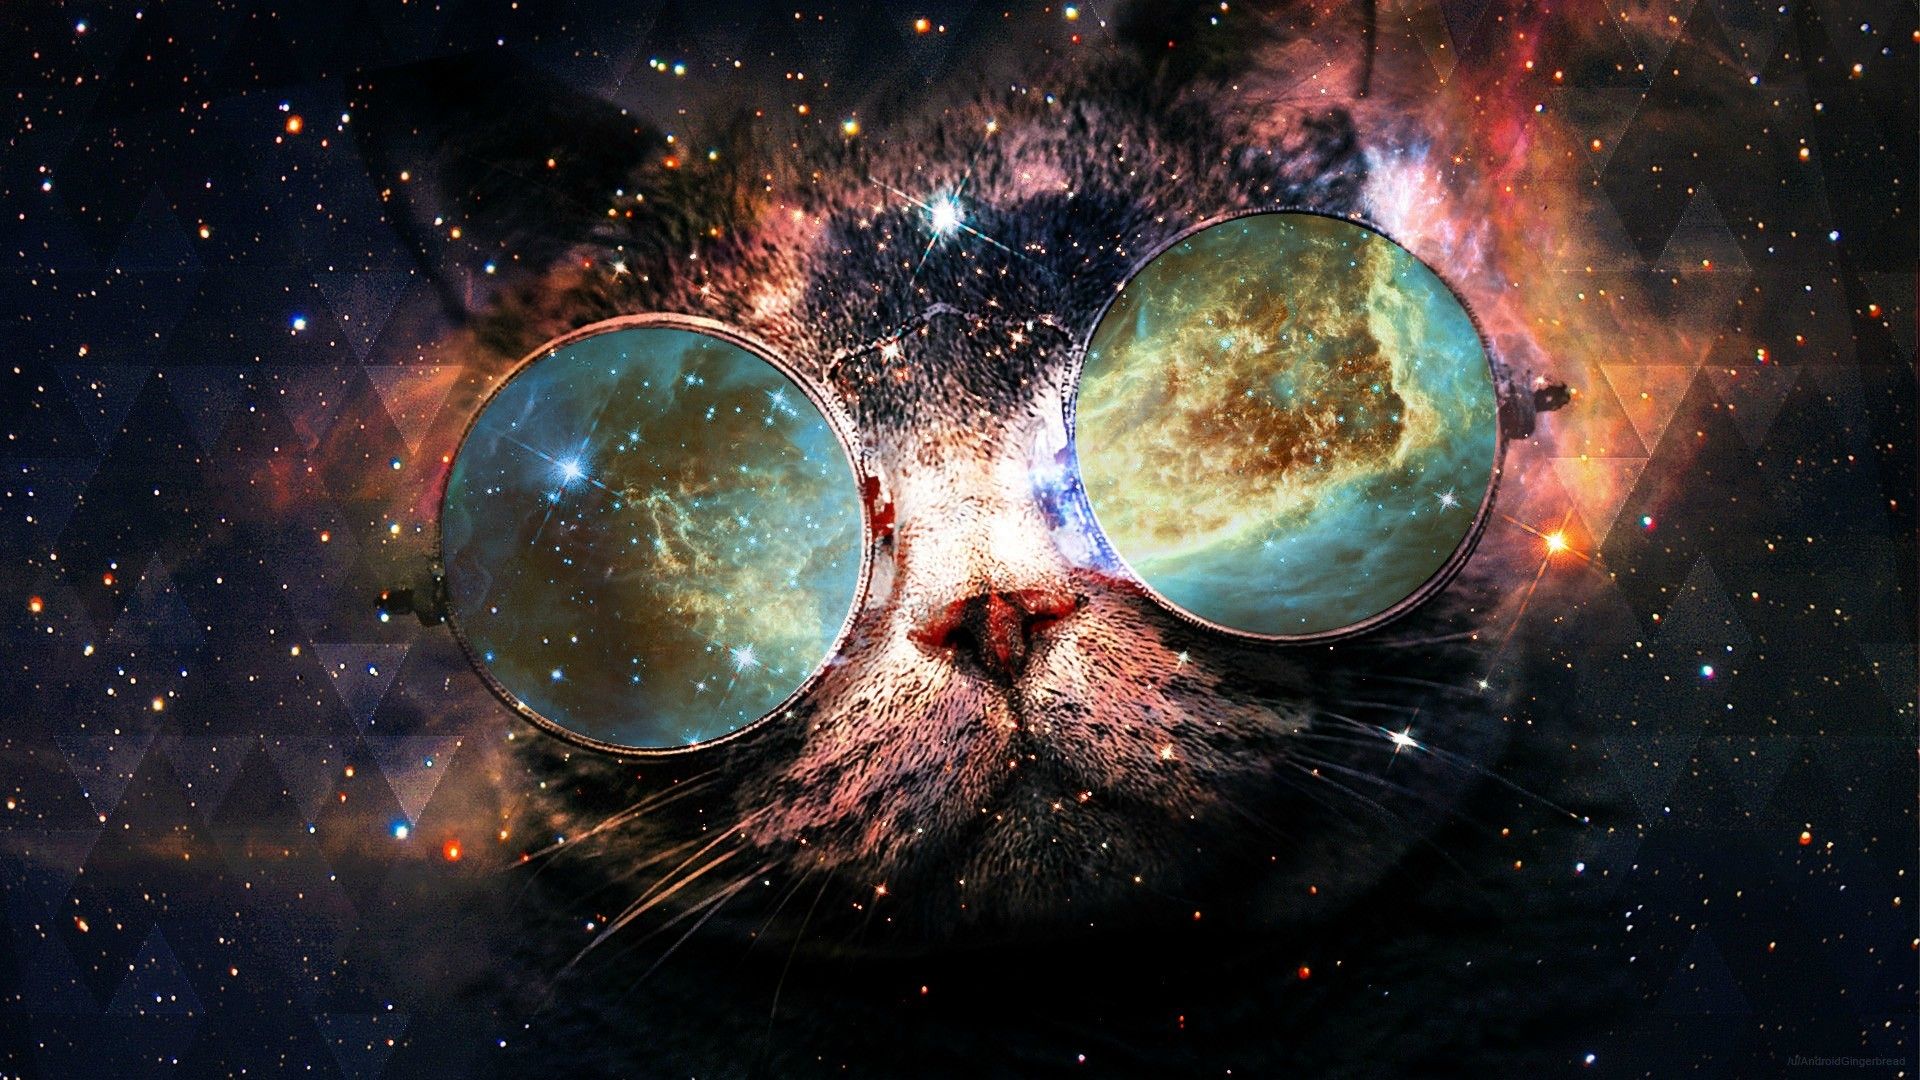 Cats in Space Wallpaper Free Cats in Space Background